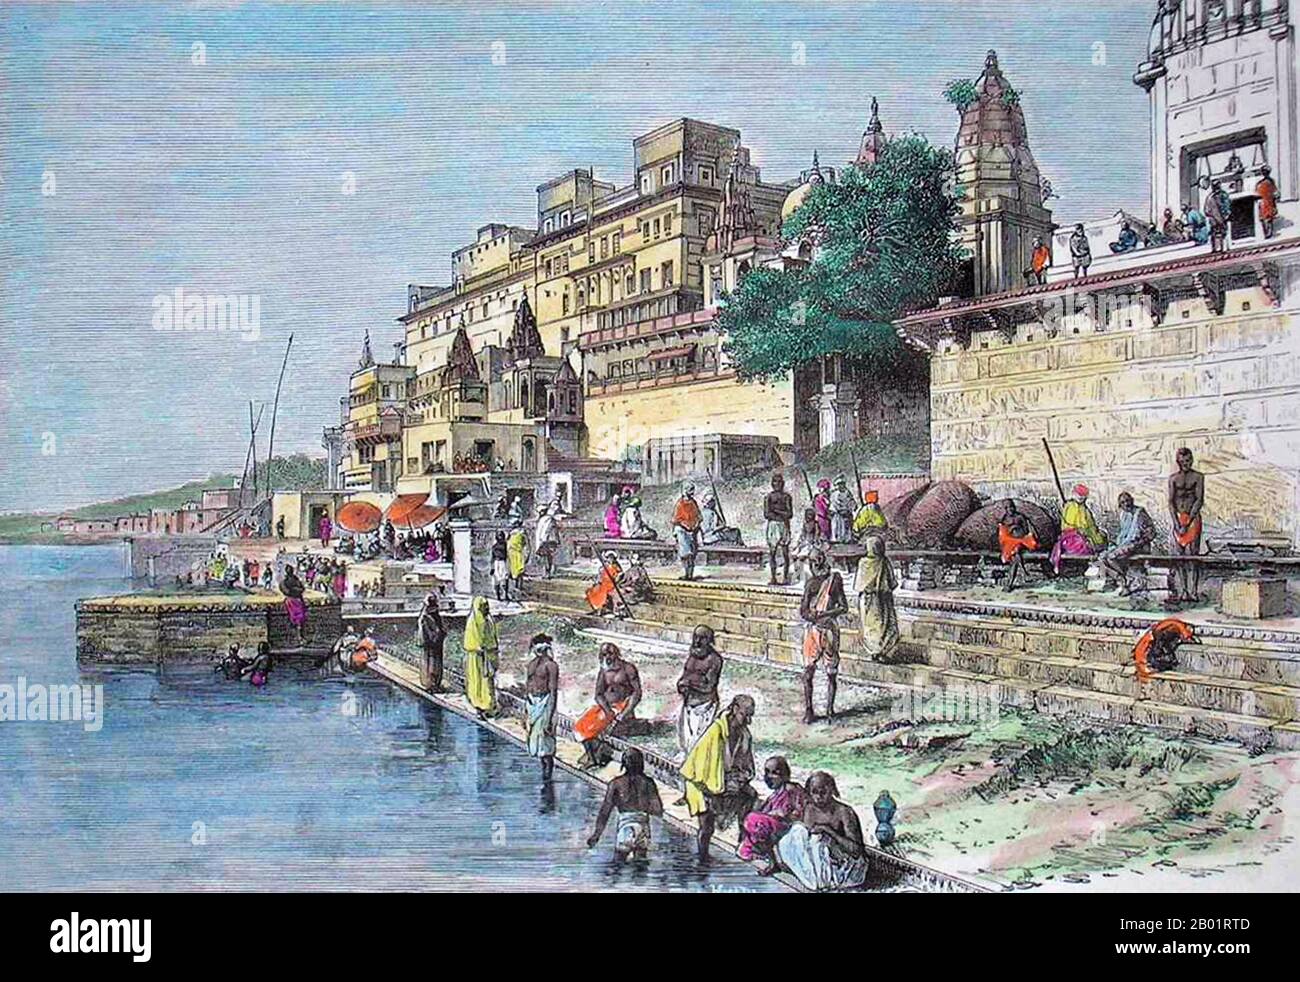 India: 'Hindu Temple, Benares'. Coloured engraving by T. Taylor, c. 1883.  Varanasi, also commonly known as Banaras or Benaras, is a city situated on the banks of the River Ganges in the Indian state of Uttar Pradesh, 320 kilometres (199 mi) southeast of state capital Lucknow. It is regarded as a holy city by Hindus, Buddhists and Jains. It is one of the oldest continuously inhabited cities in the world and the oldest in India.  The Kashi Naresh (Maharaja of Kashi) is the chief cultural patron of Varanasi and an essential part of all religious celebrations. Stock Photo